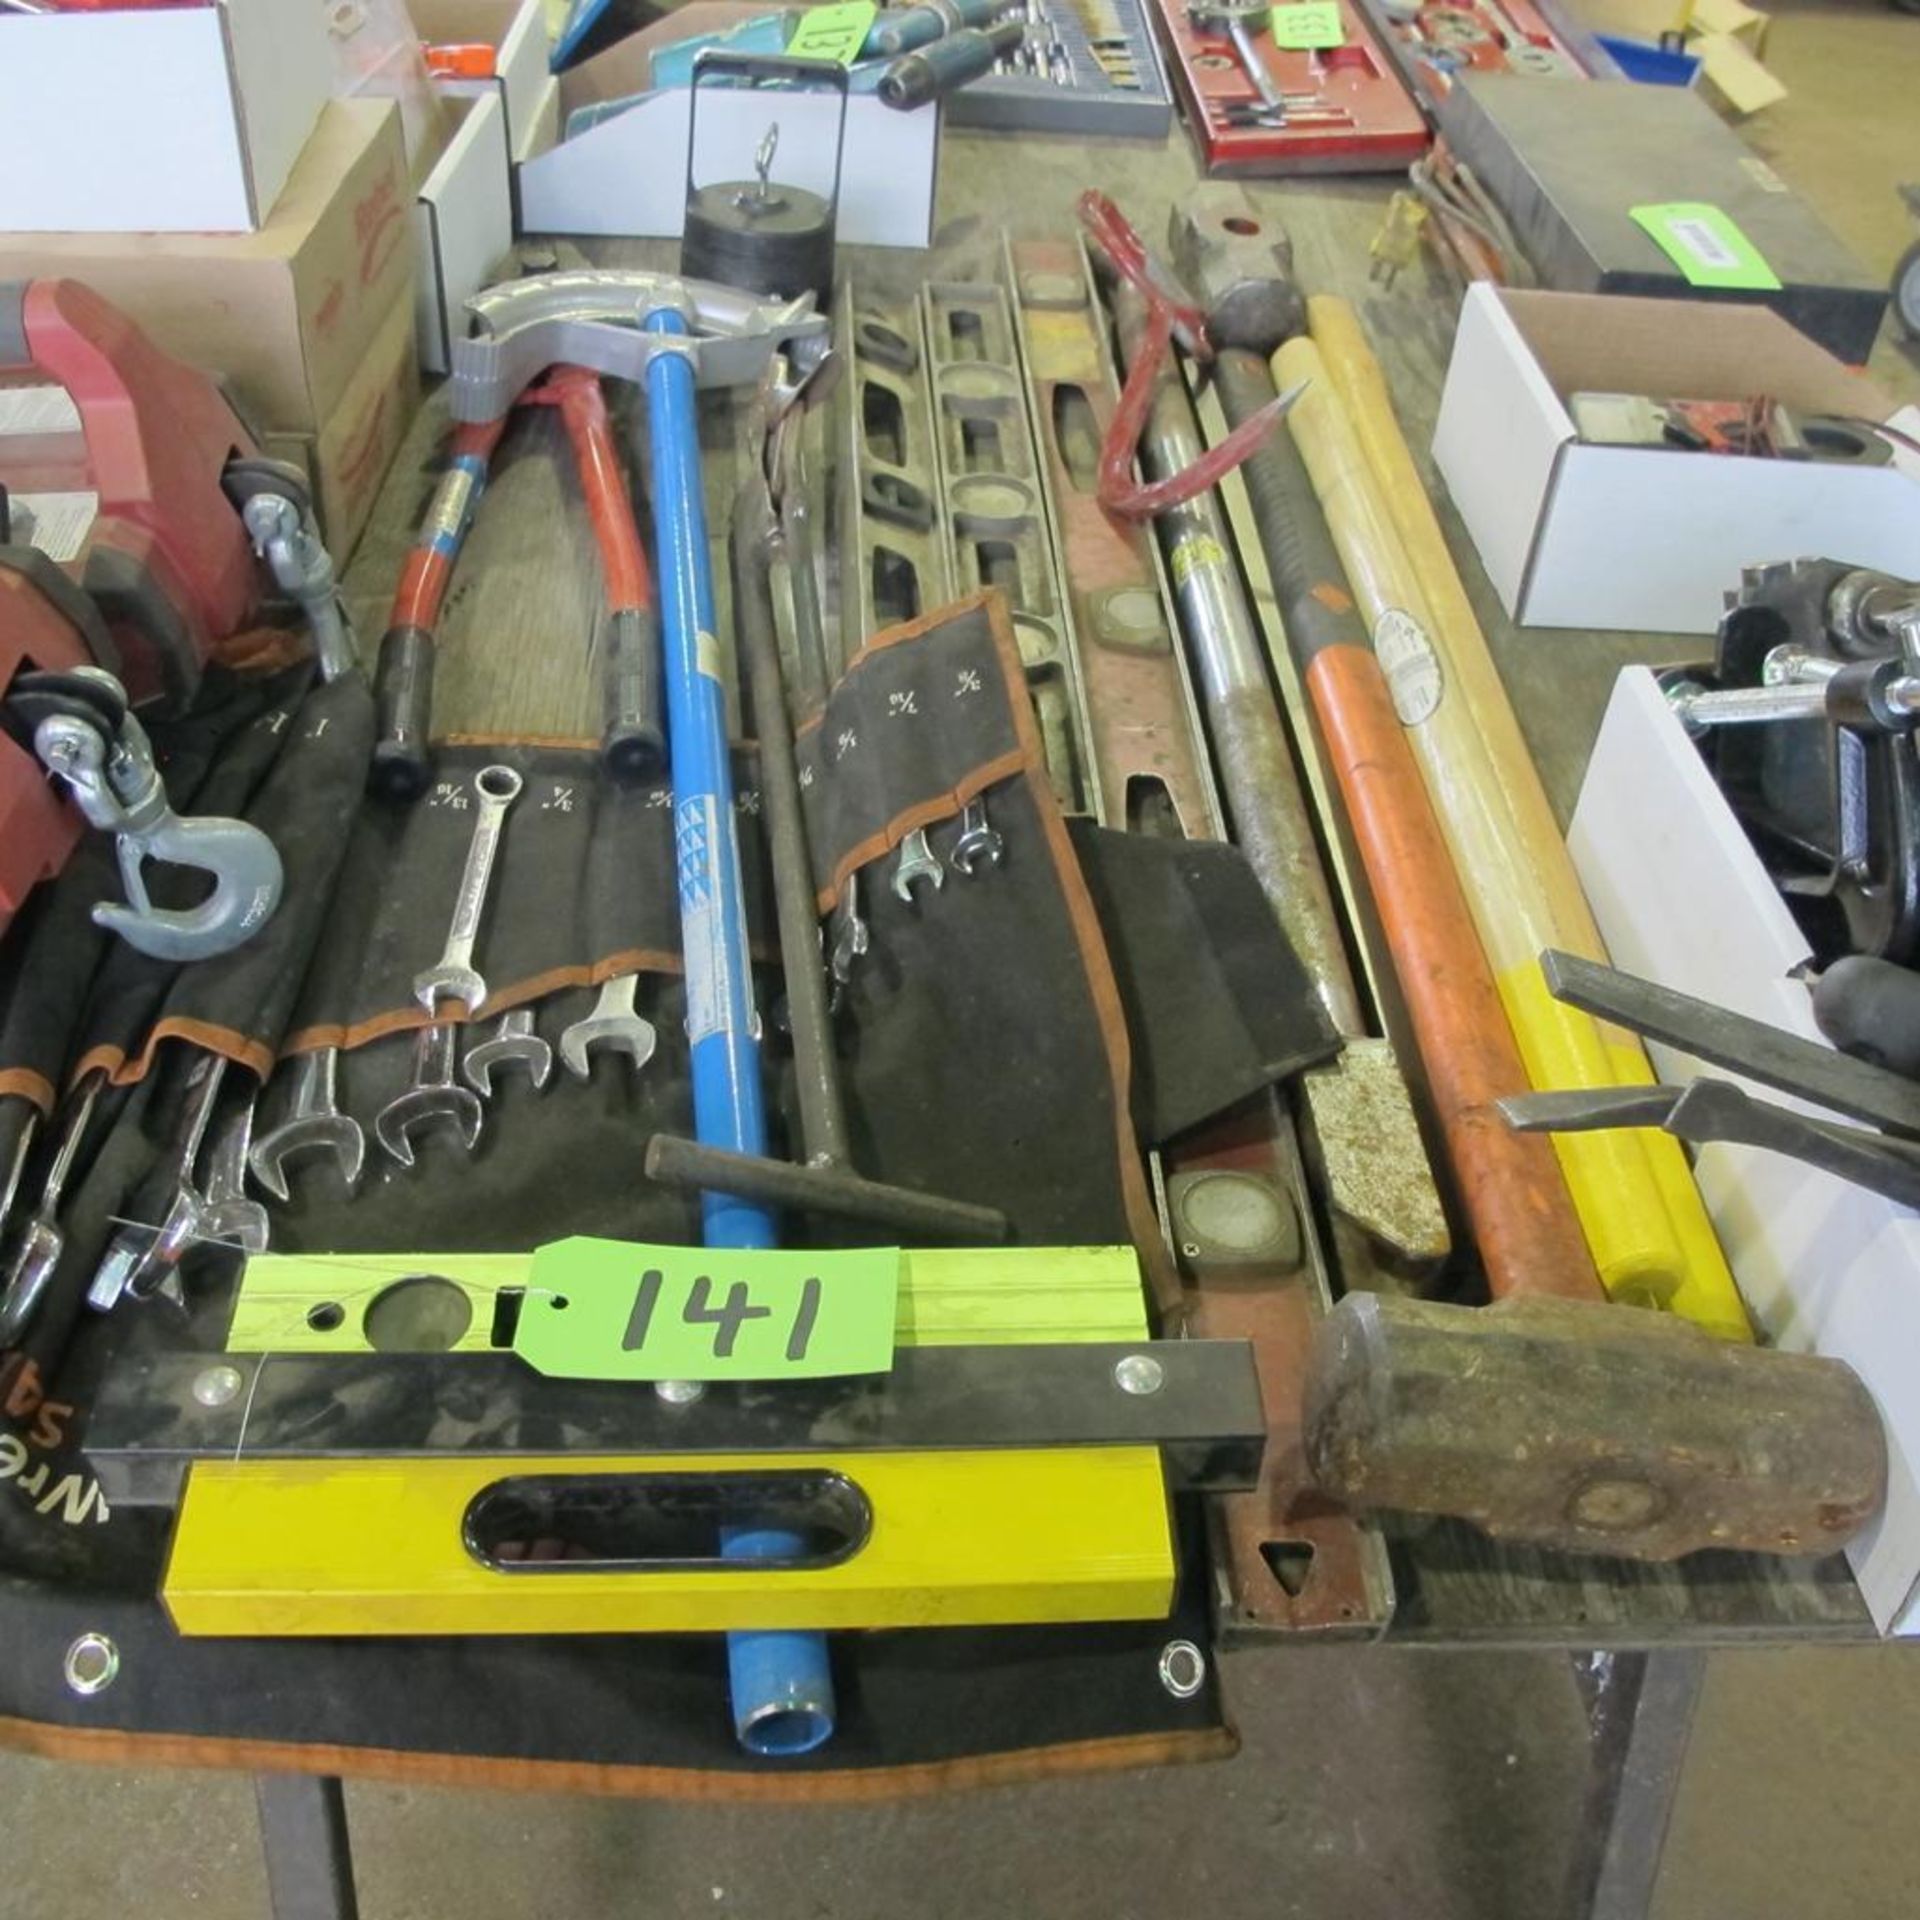 LOT OF HAND TOOLS (WRENCH SET, CRIMPER, CONDUIT BENCHES, LEVELS, VISE GRIP, SLEDGE HAMMERS, HOCK PUL